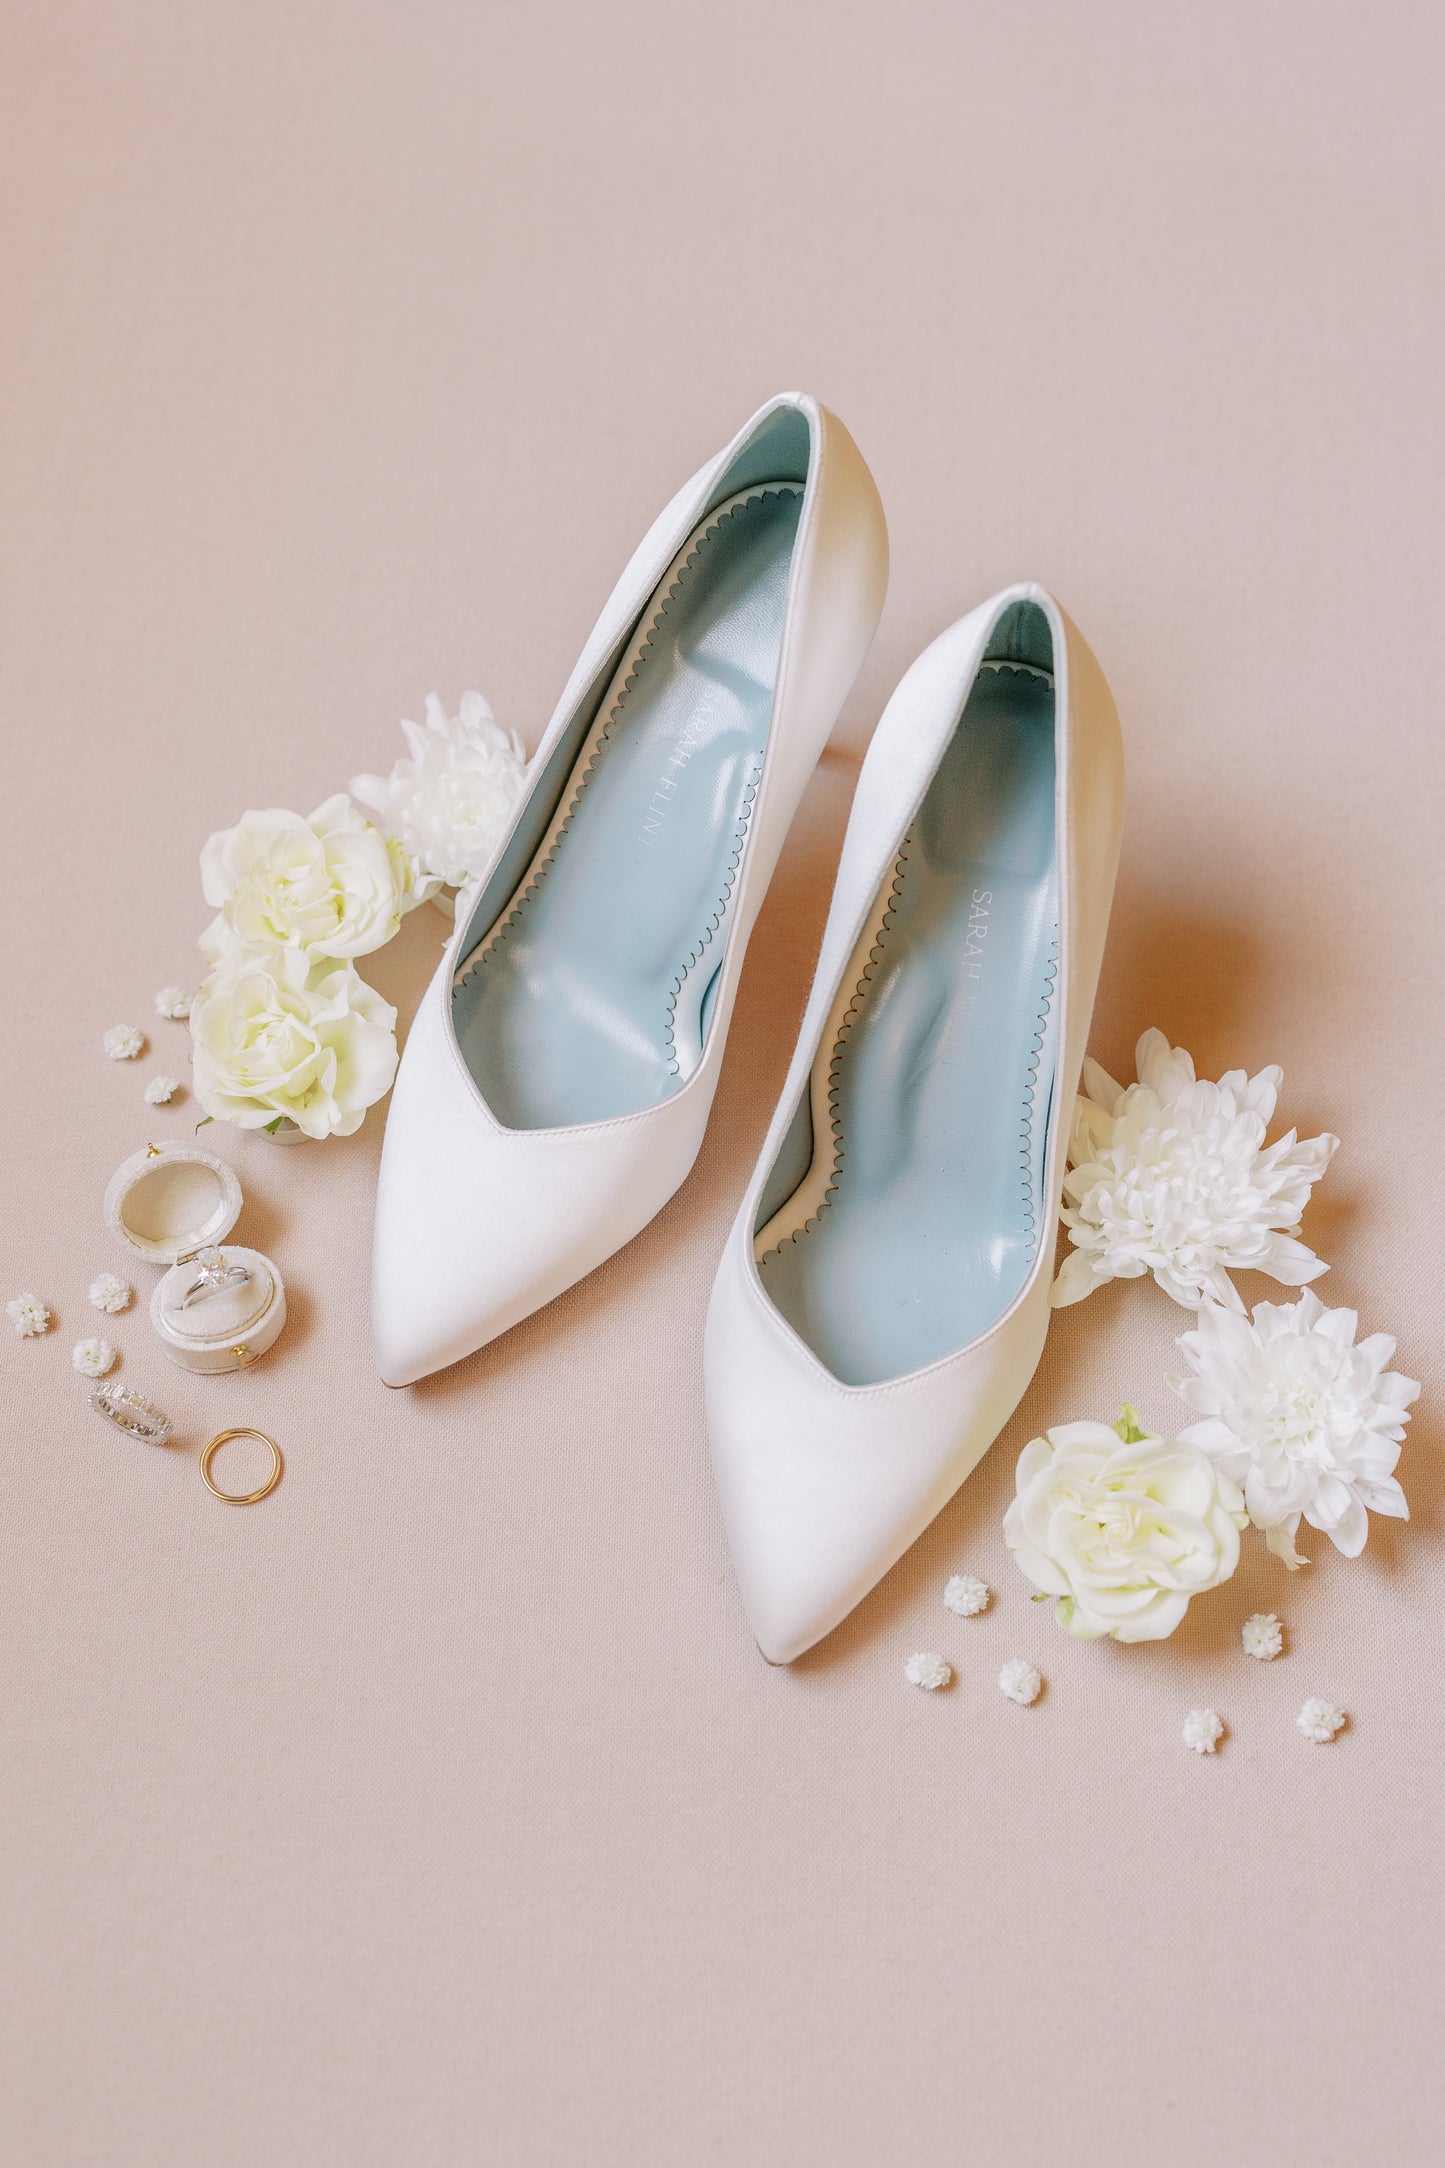 Shoe detail shot by The Ganeys featuring the georgian linen oval ring box in dove white